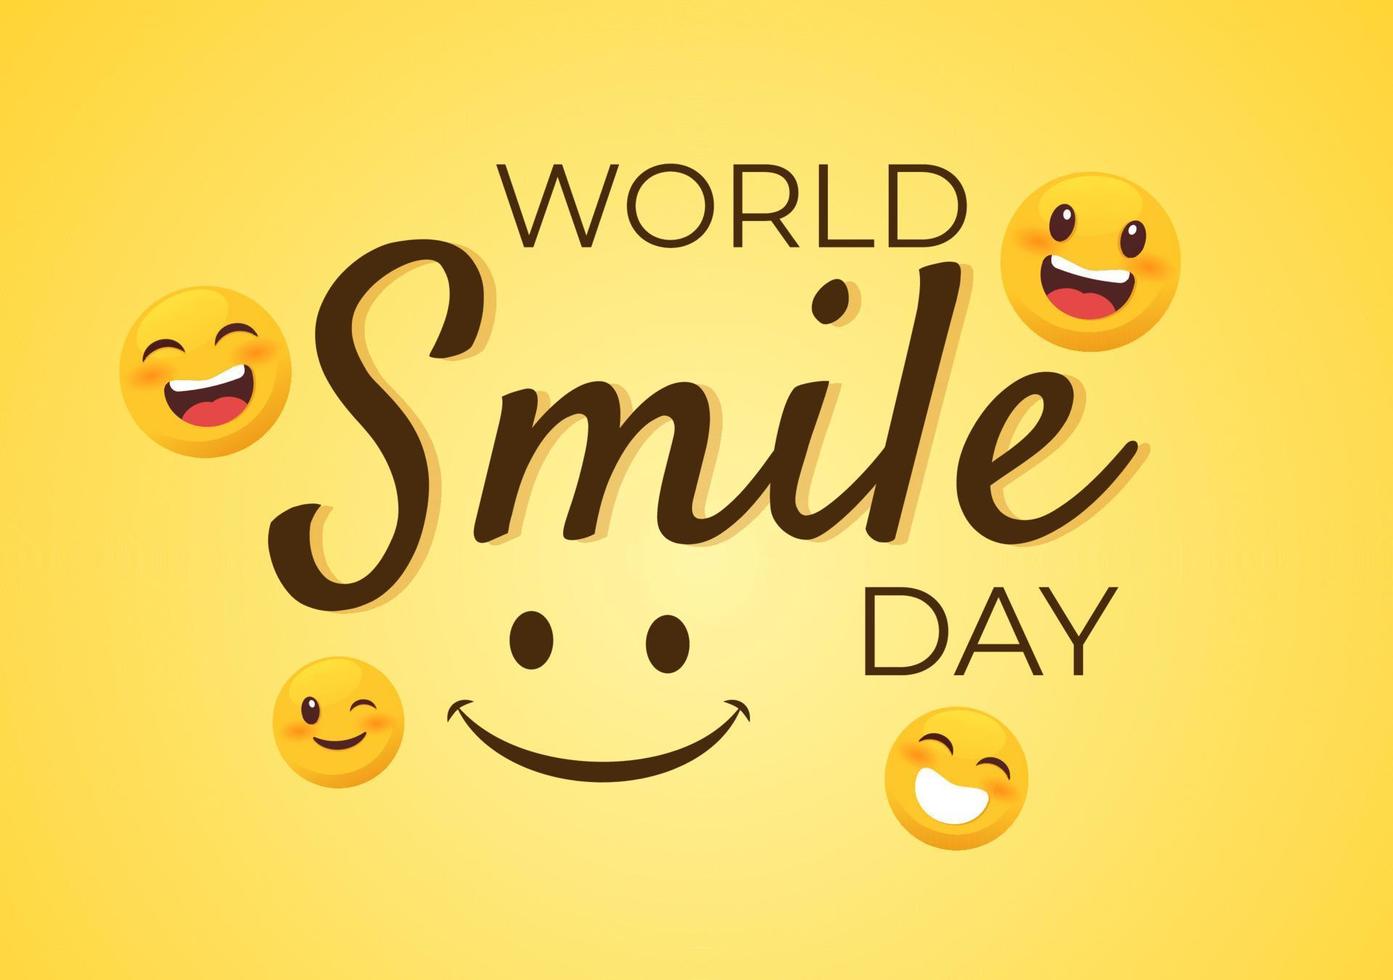 World Smile Day Hand Drawn Cartoon Illustration with Smiling Expression and Happiness Face in Flat Style Background vector